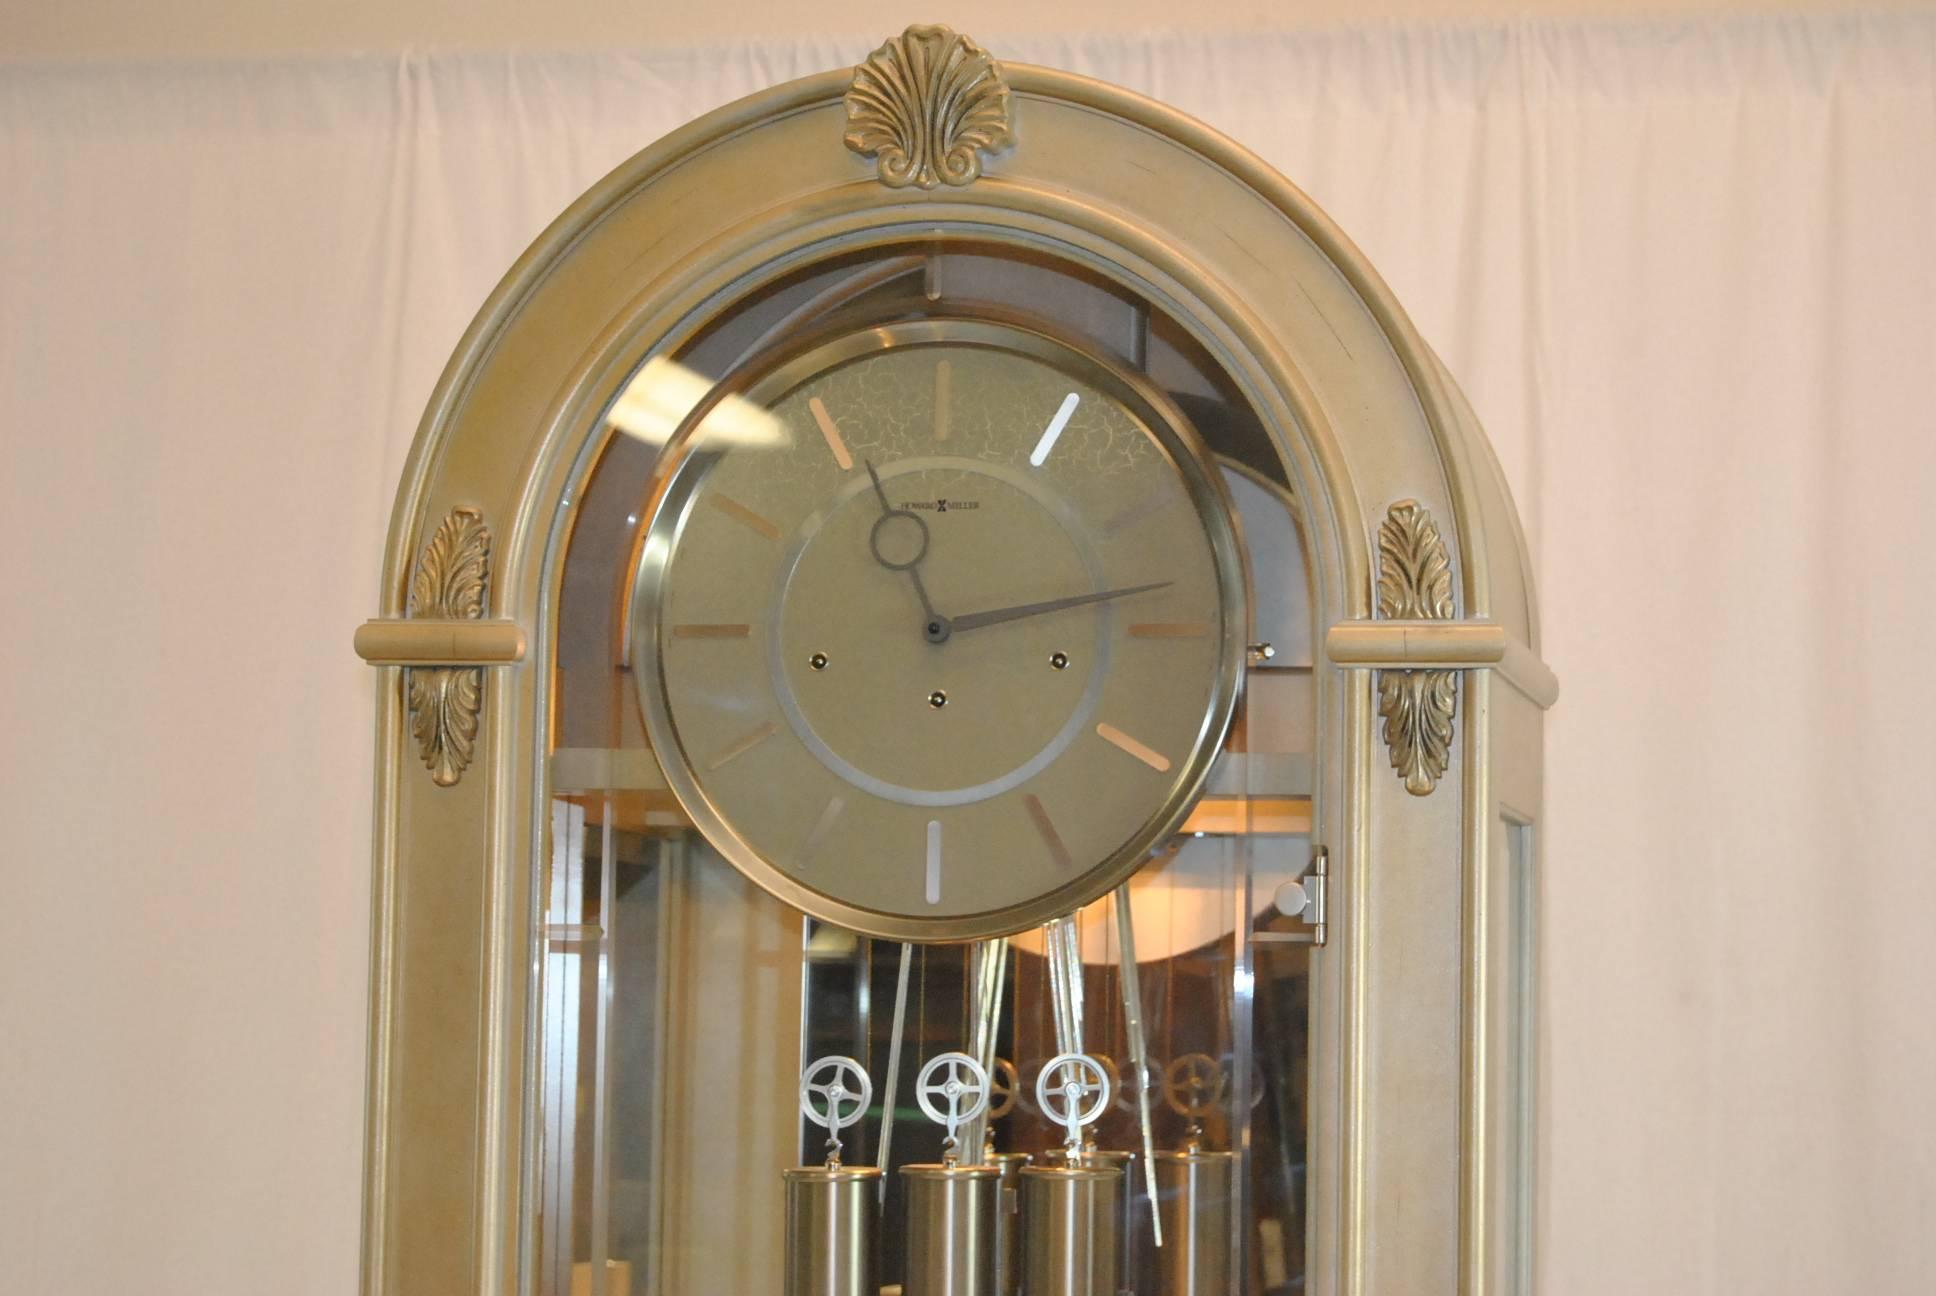 A great contemporary grandfather clock by Howard Miller.  This is the Coastal Point Model 610-898 which was designed by Chris Bergelin and has been discontinued. It features a platinum finish on hardwoods and veneers on the arched case with